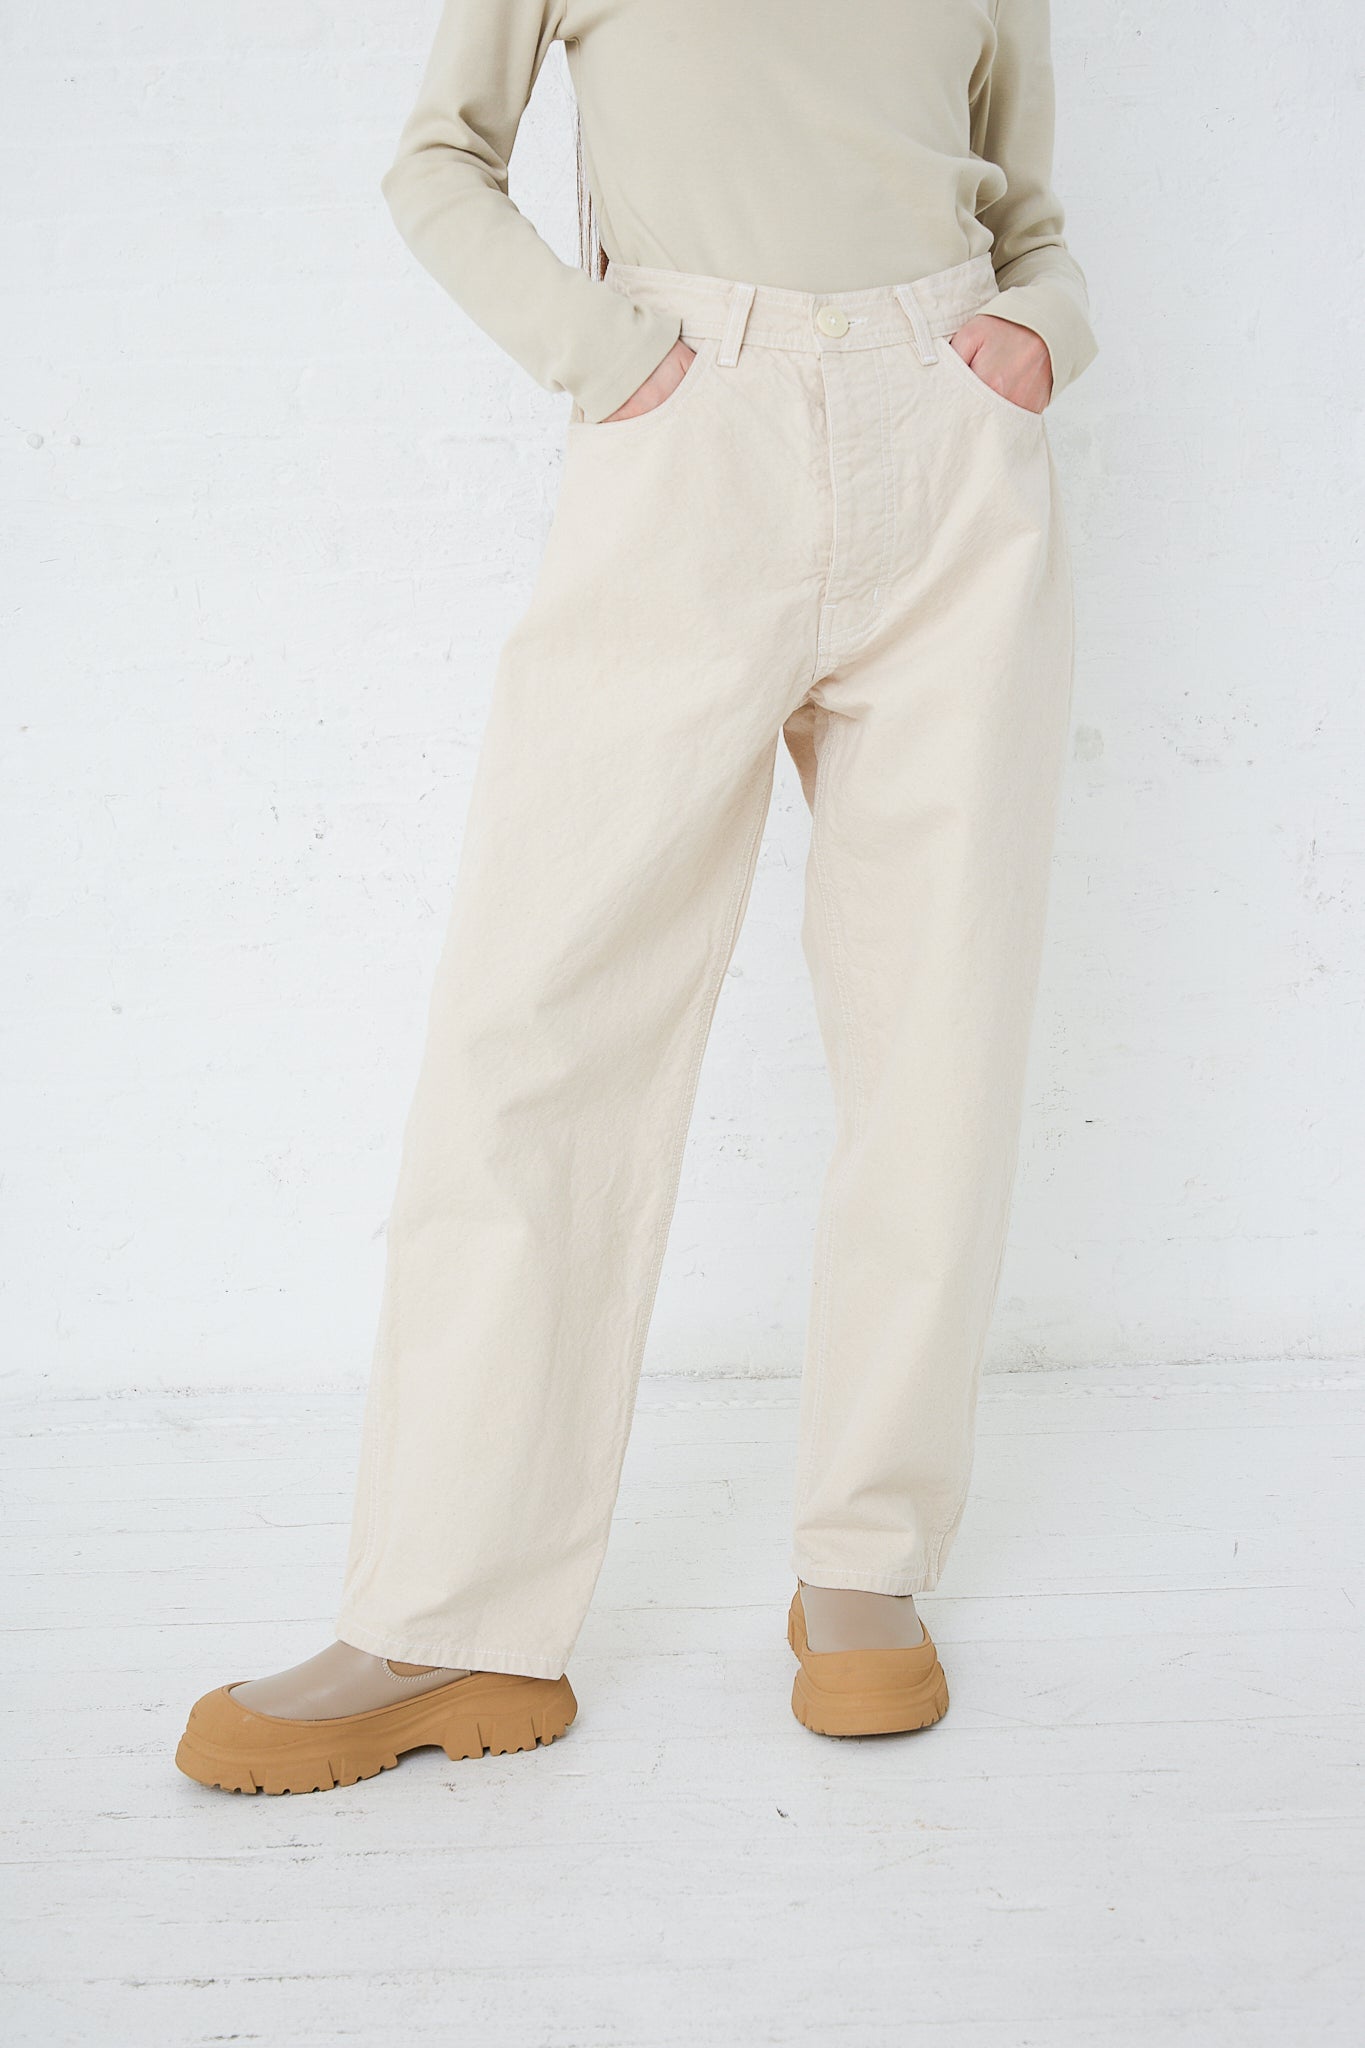 A woman wearing Jesse Kamm's Organic Canvas California Wide pants in Natural.